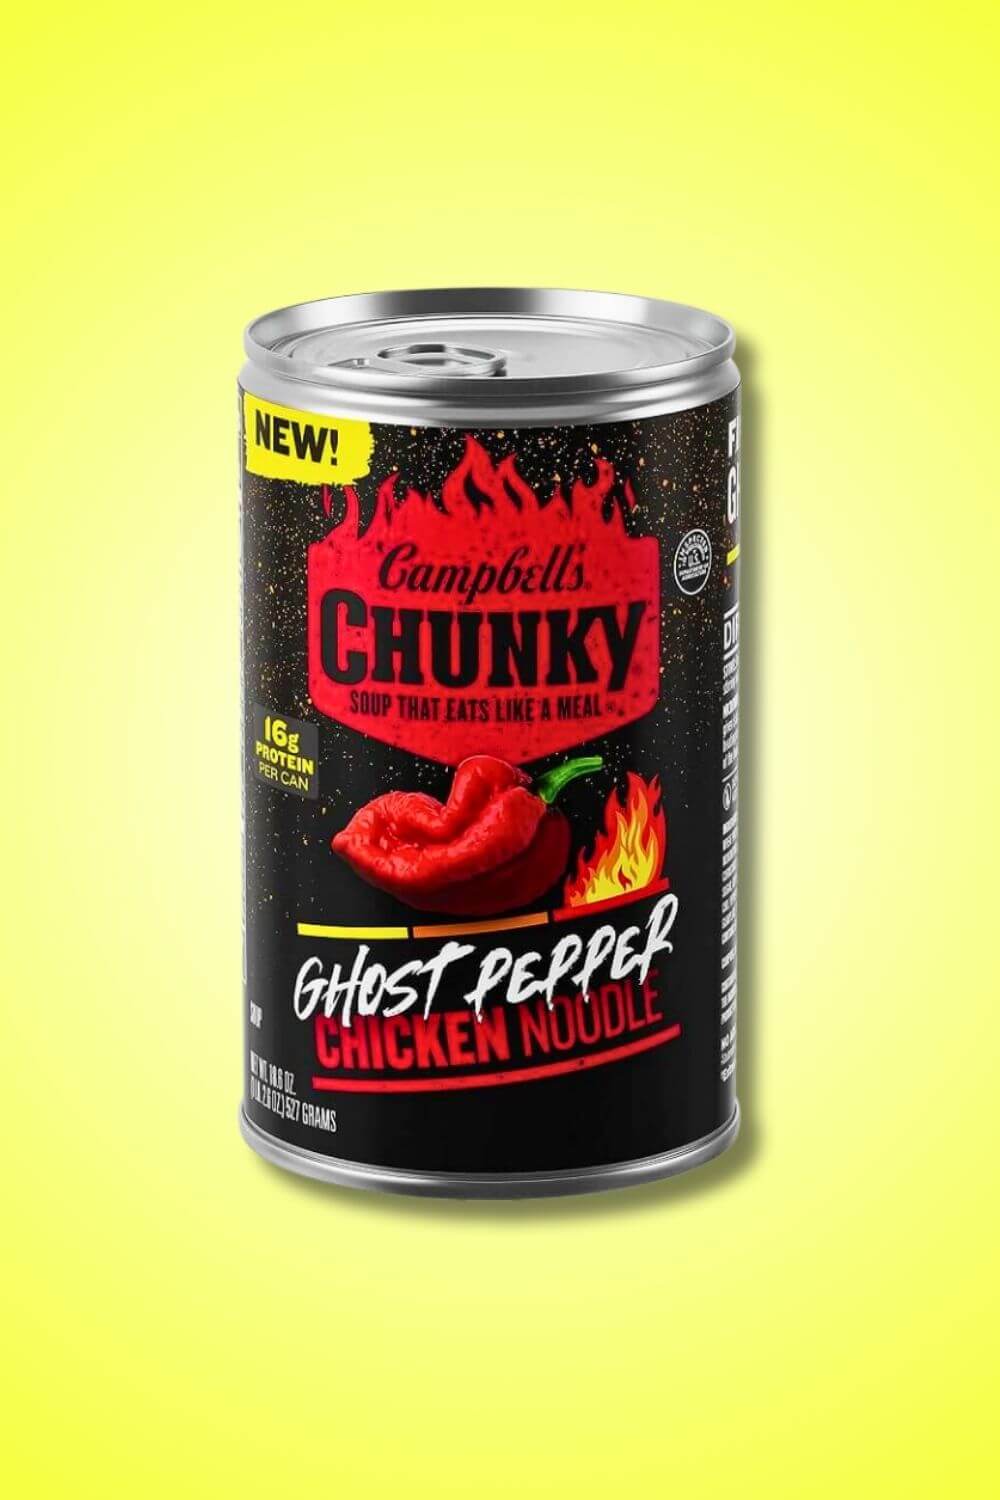 Campbell's Chunky Ghost Pepper Chicken Noodle Soup